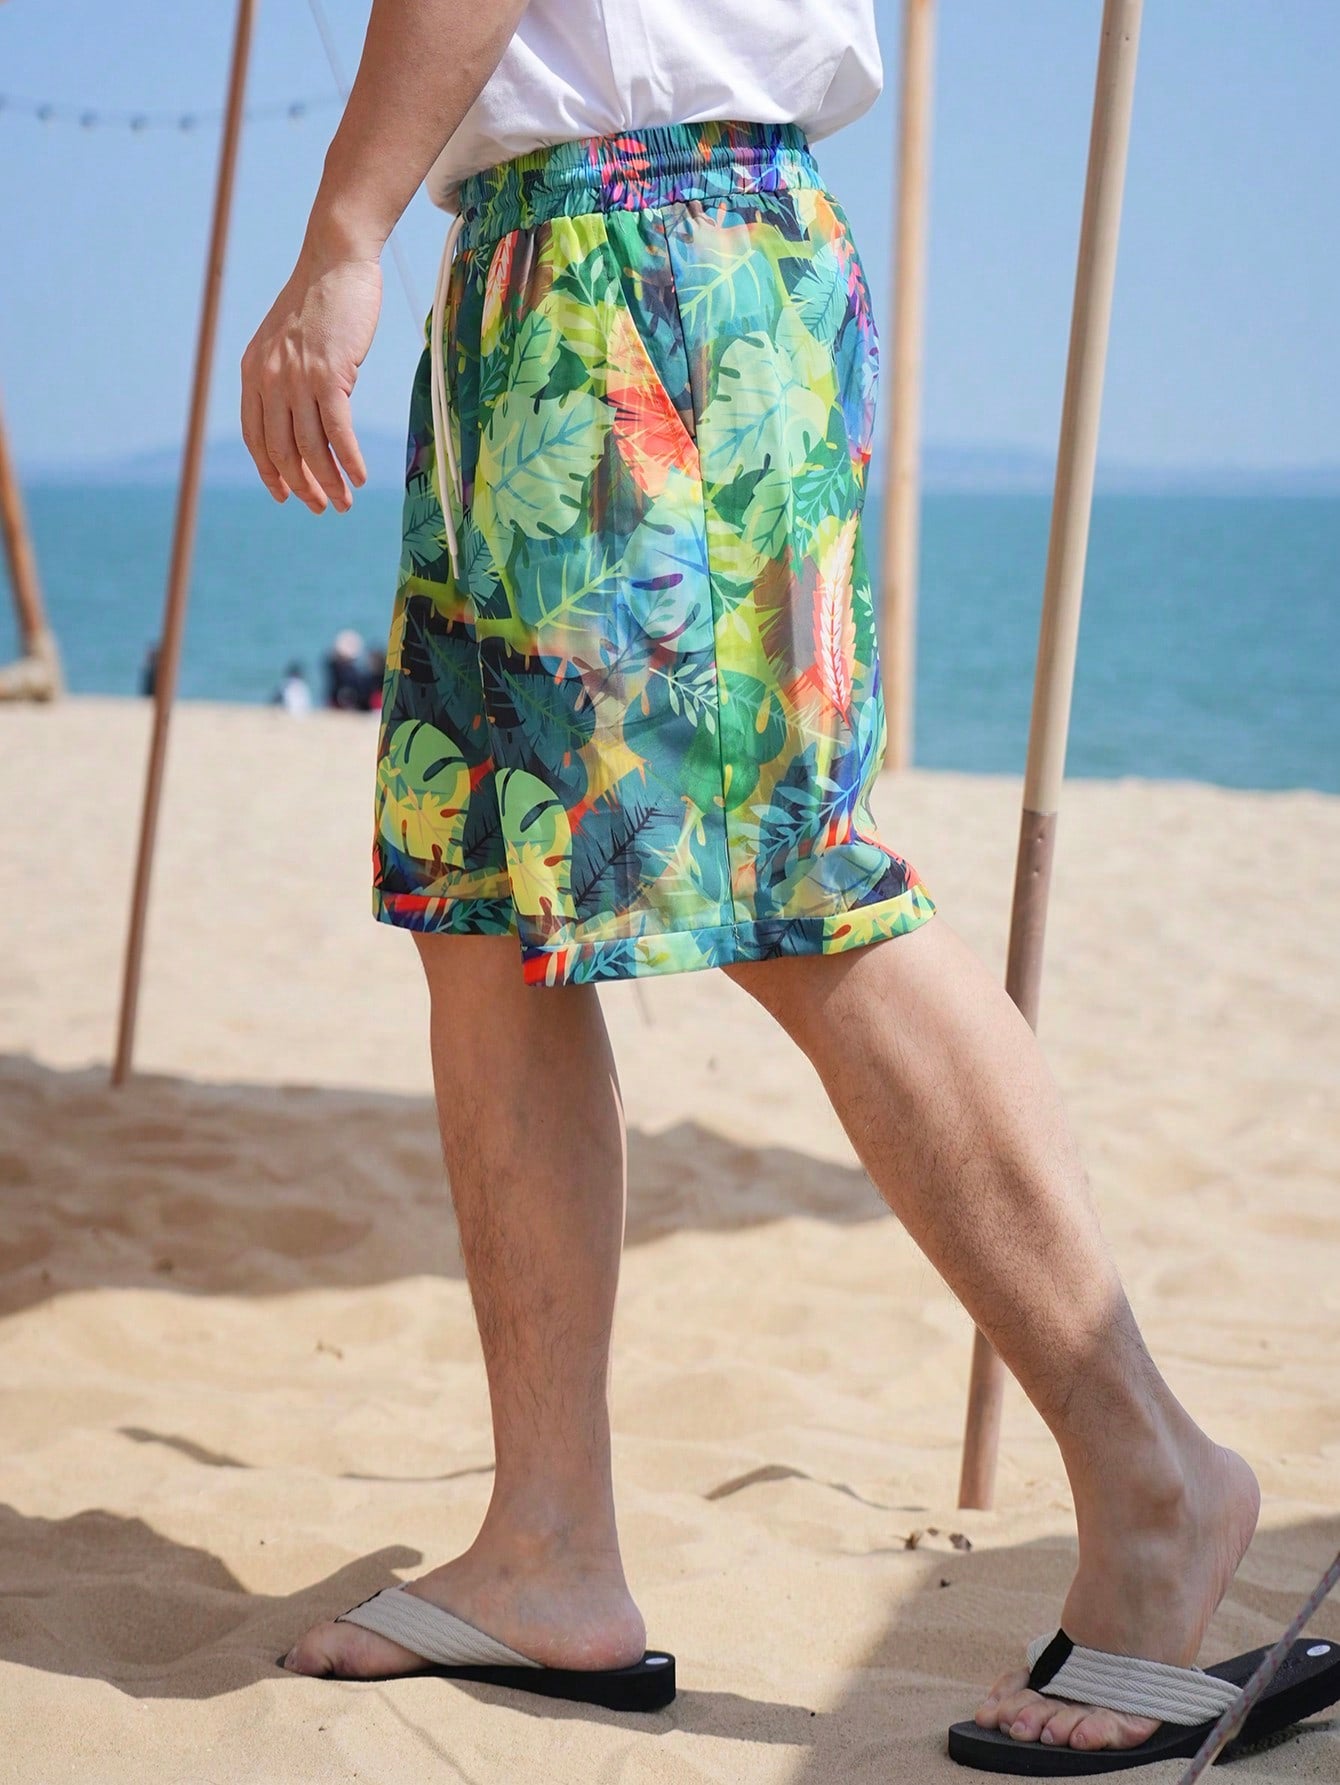 Men's Tropical Plant Print Vacation Style Casual Shorts For Summer